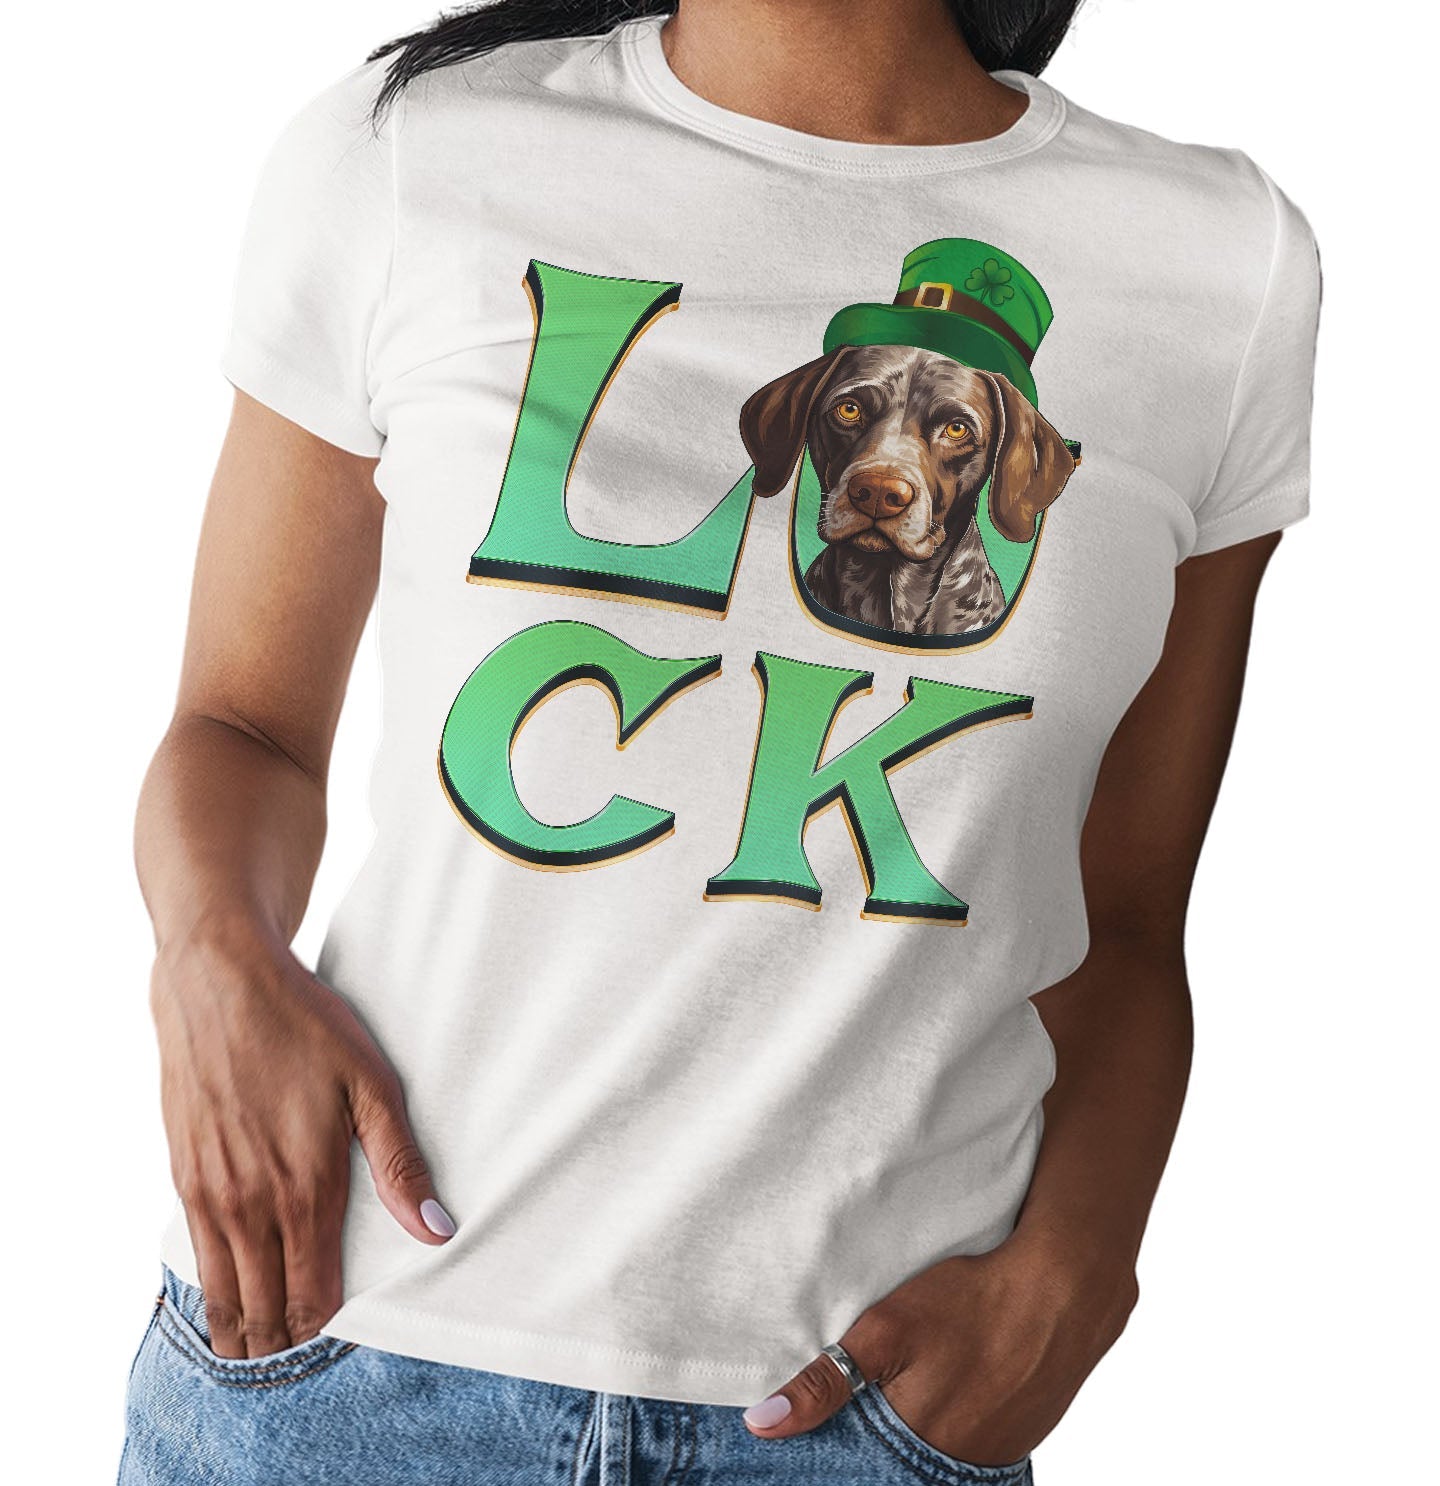 Big LUCK St. Patrick's Day German Shorthaired Pointer - Women's Fitted T-Shirt